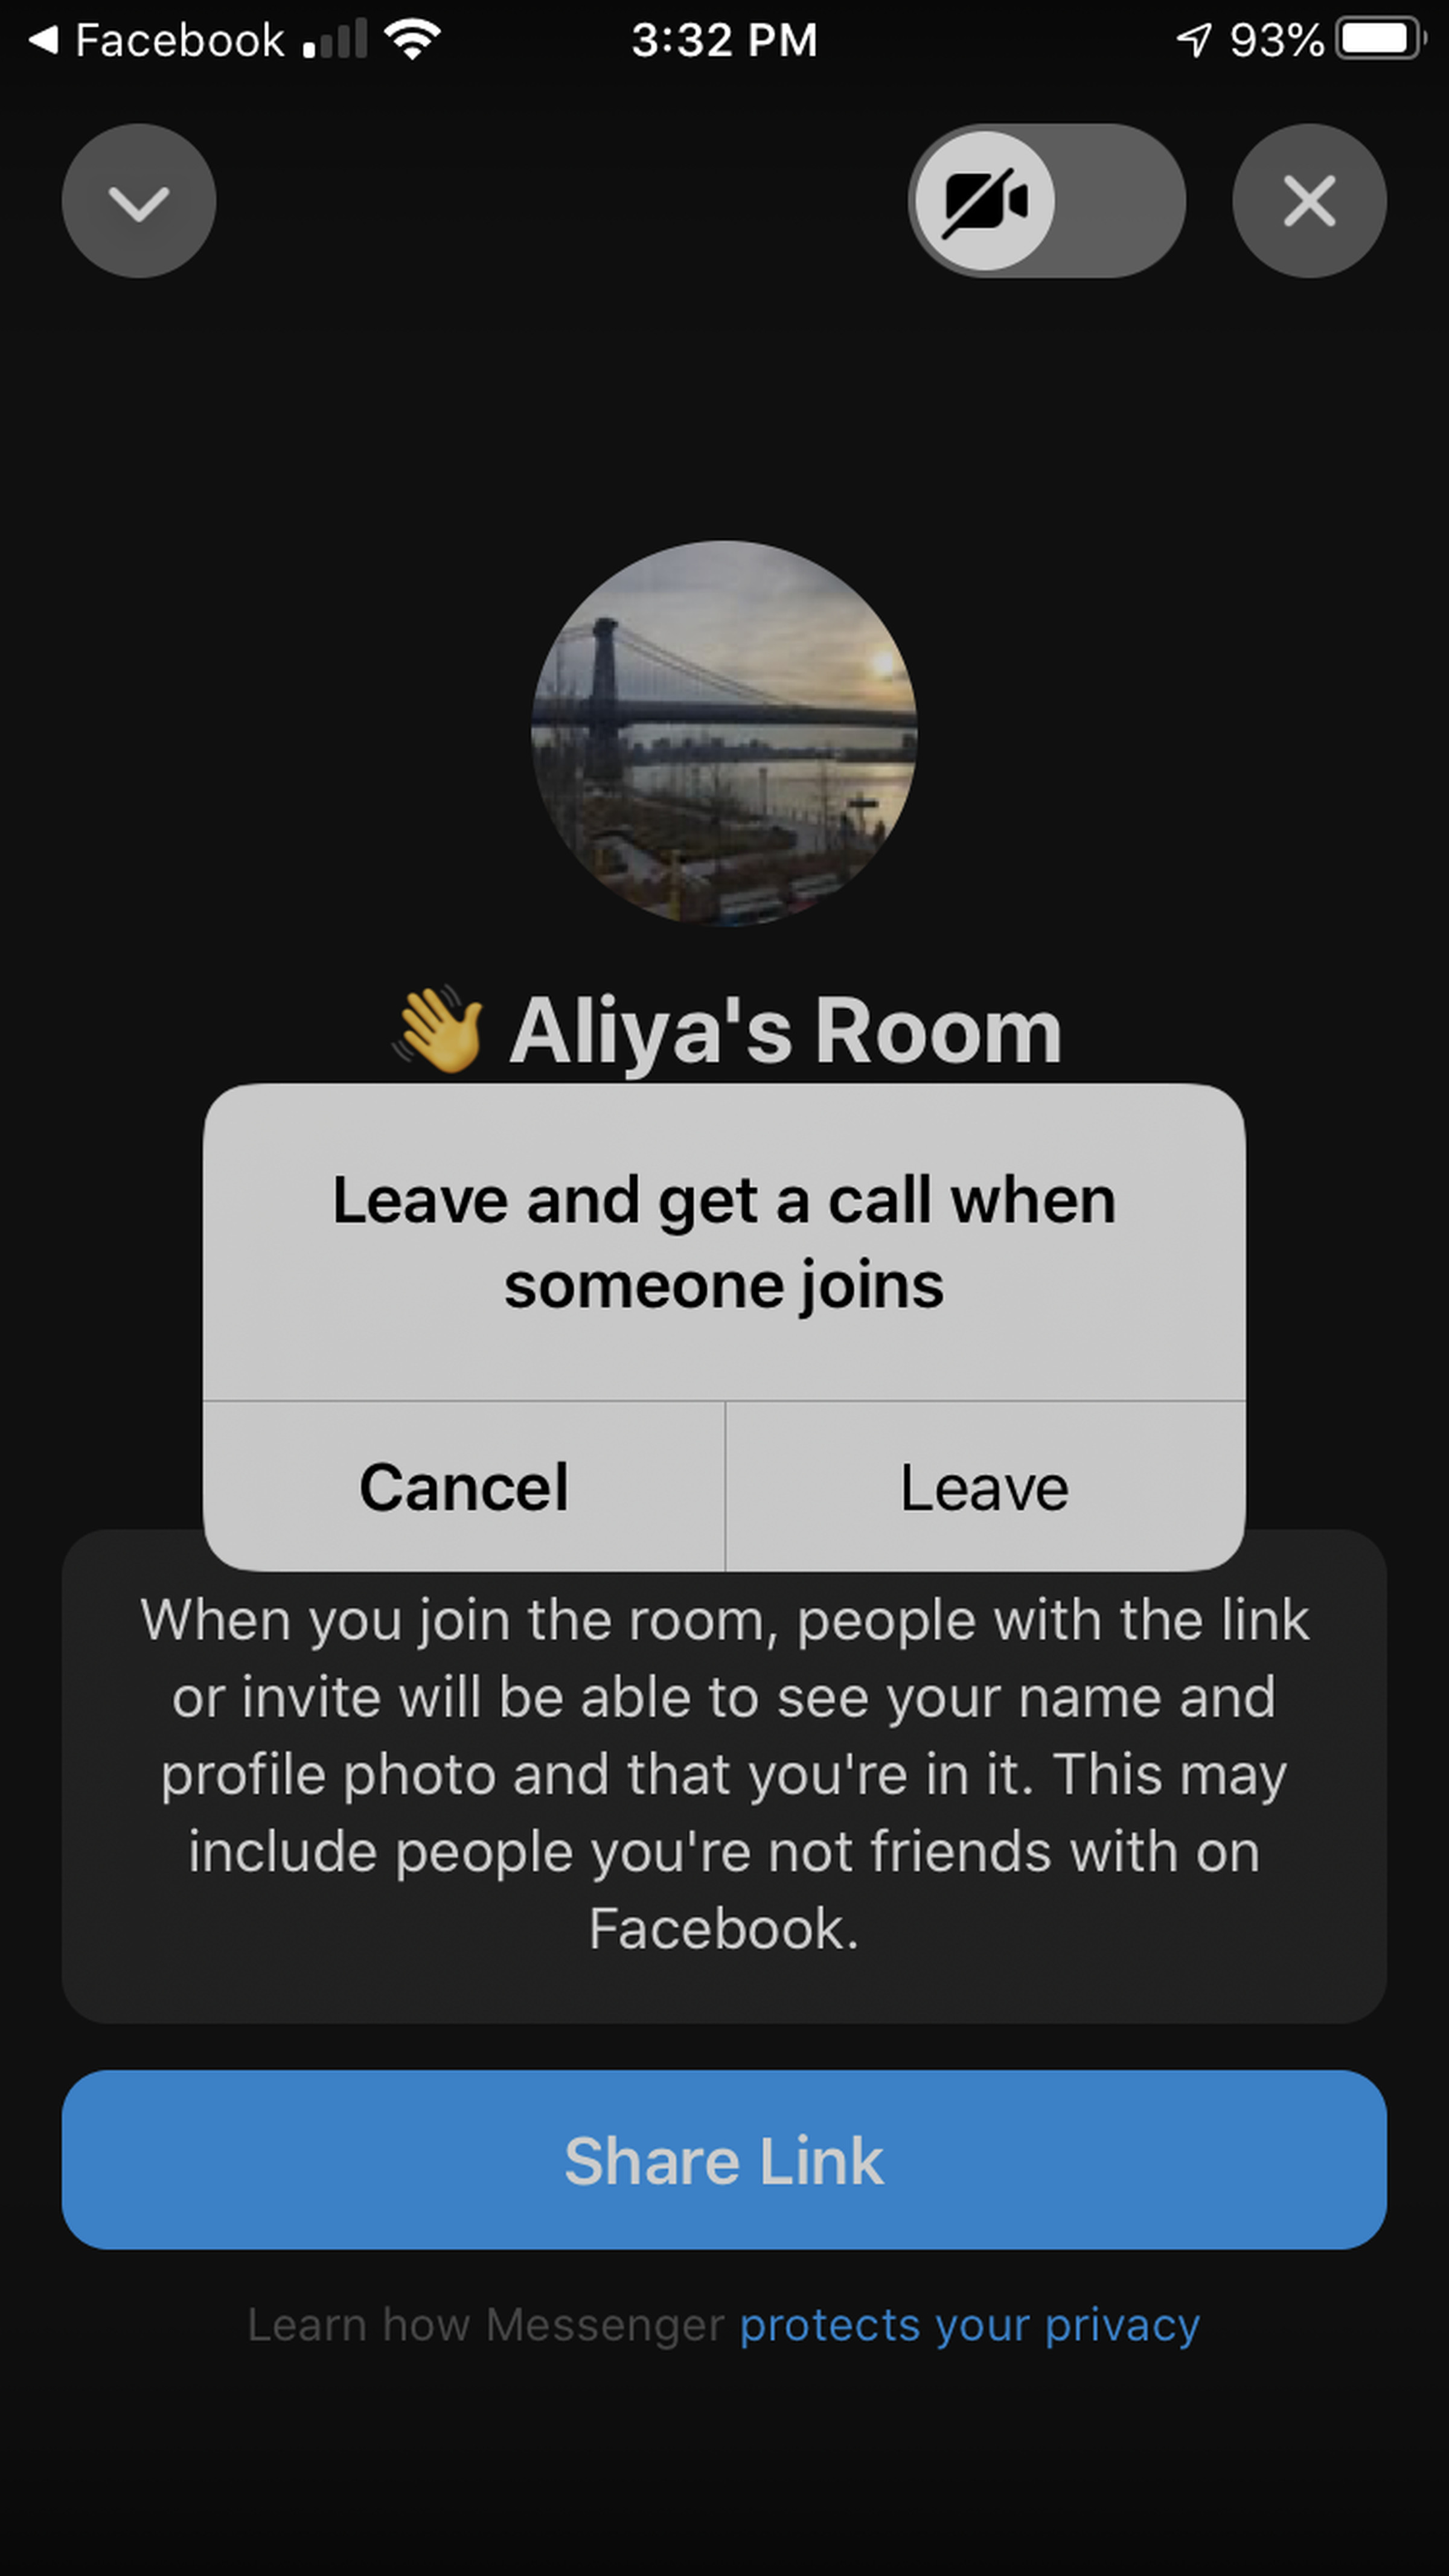 You’ll get a window asking you if you would like to leave the call but get notified when another participant joins. You can tap either “Cancel” or “Leave.”